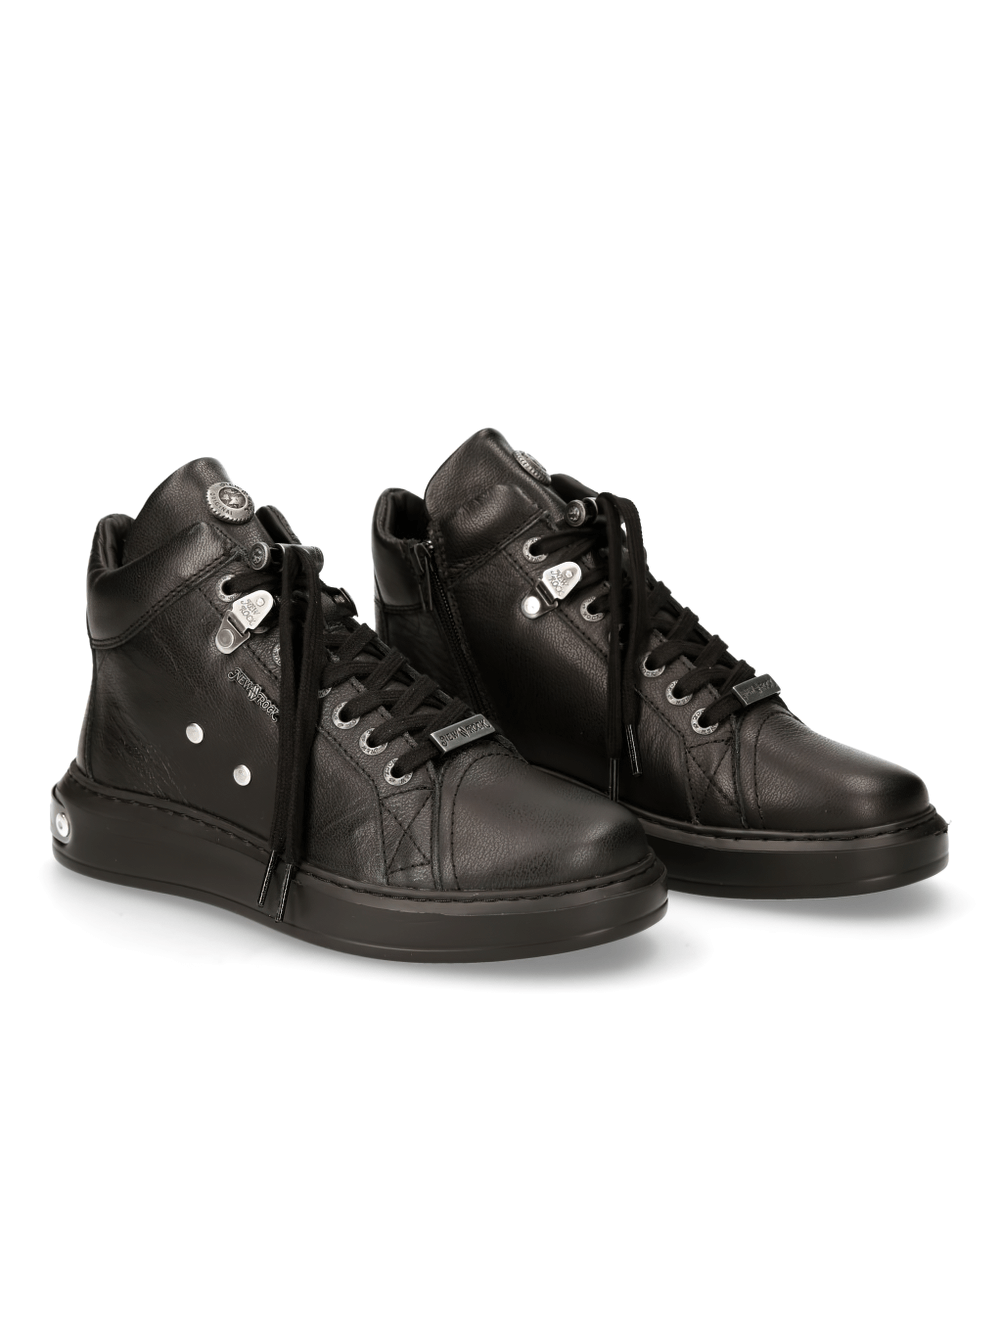 NEW ROCK Black Lace-Up Boots with Metallic Details